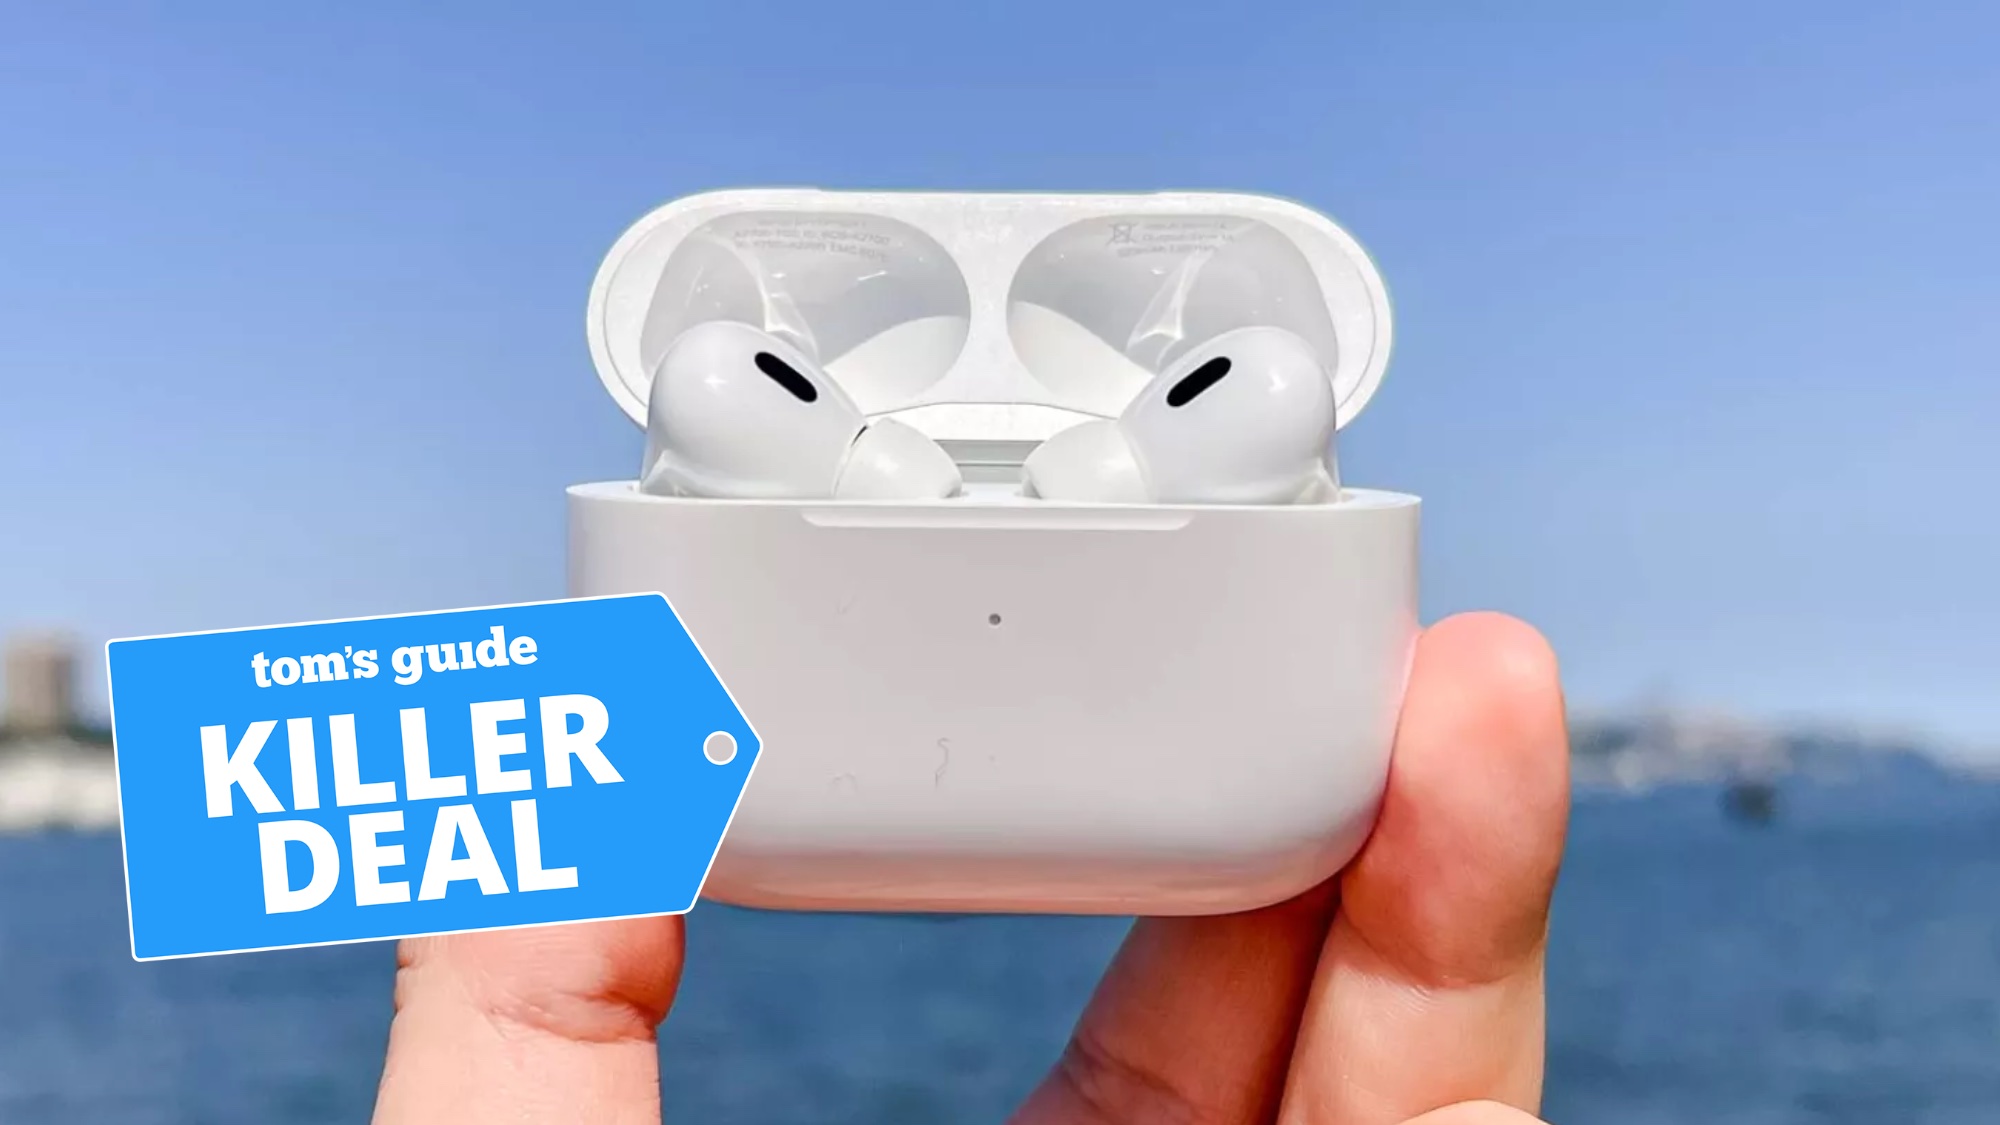 AirPods Pro 2 with offer tag